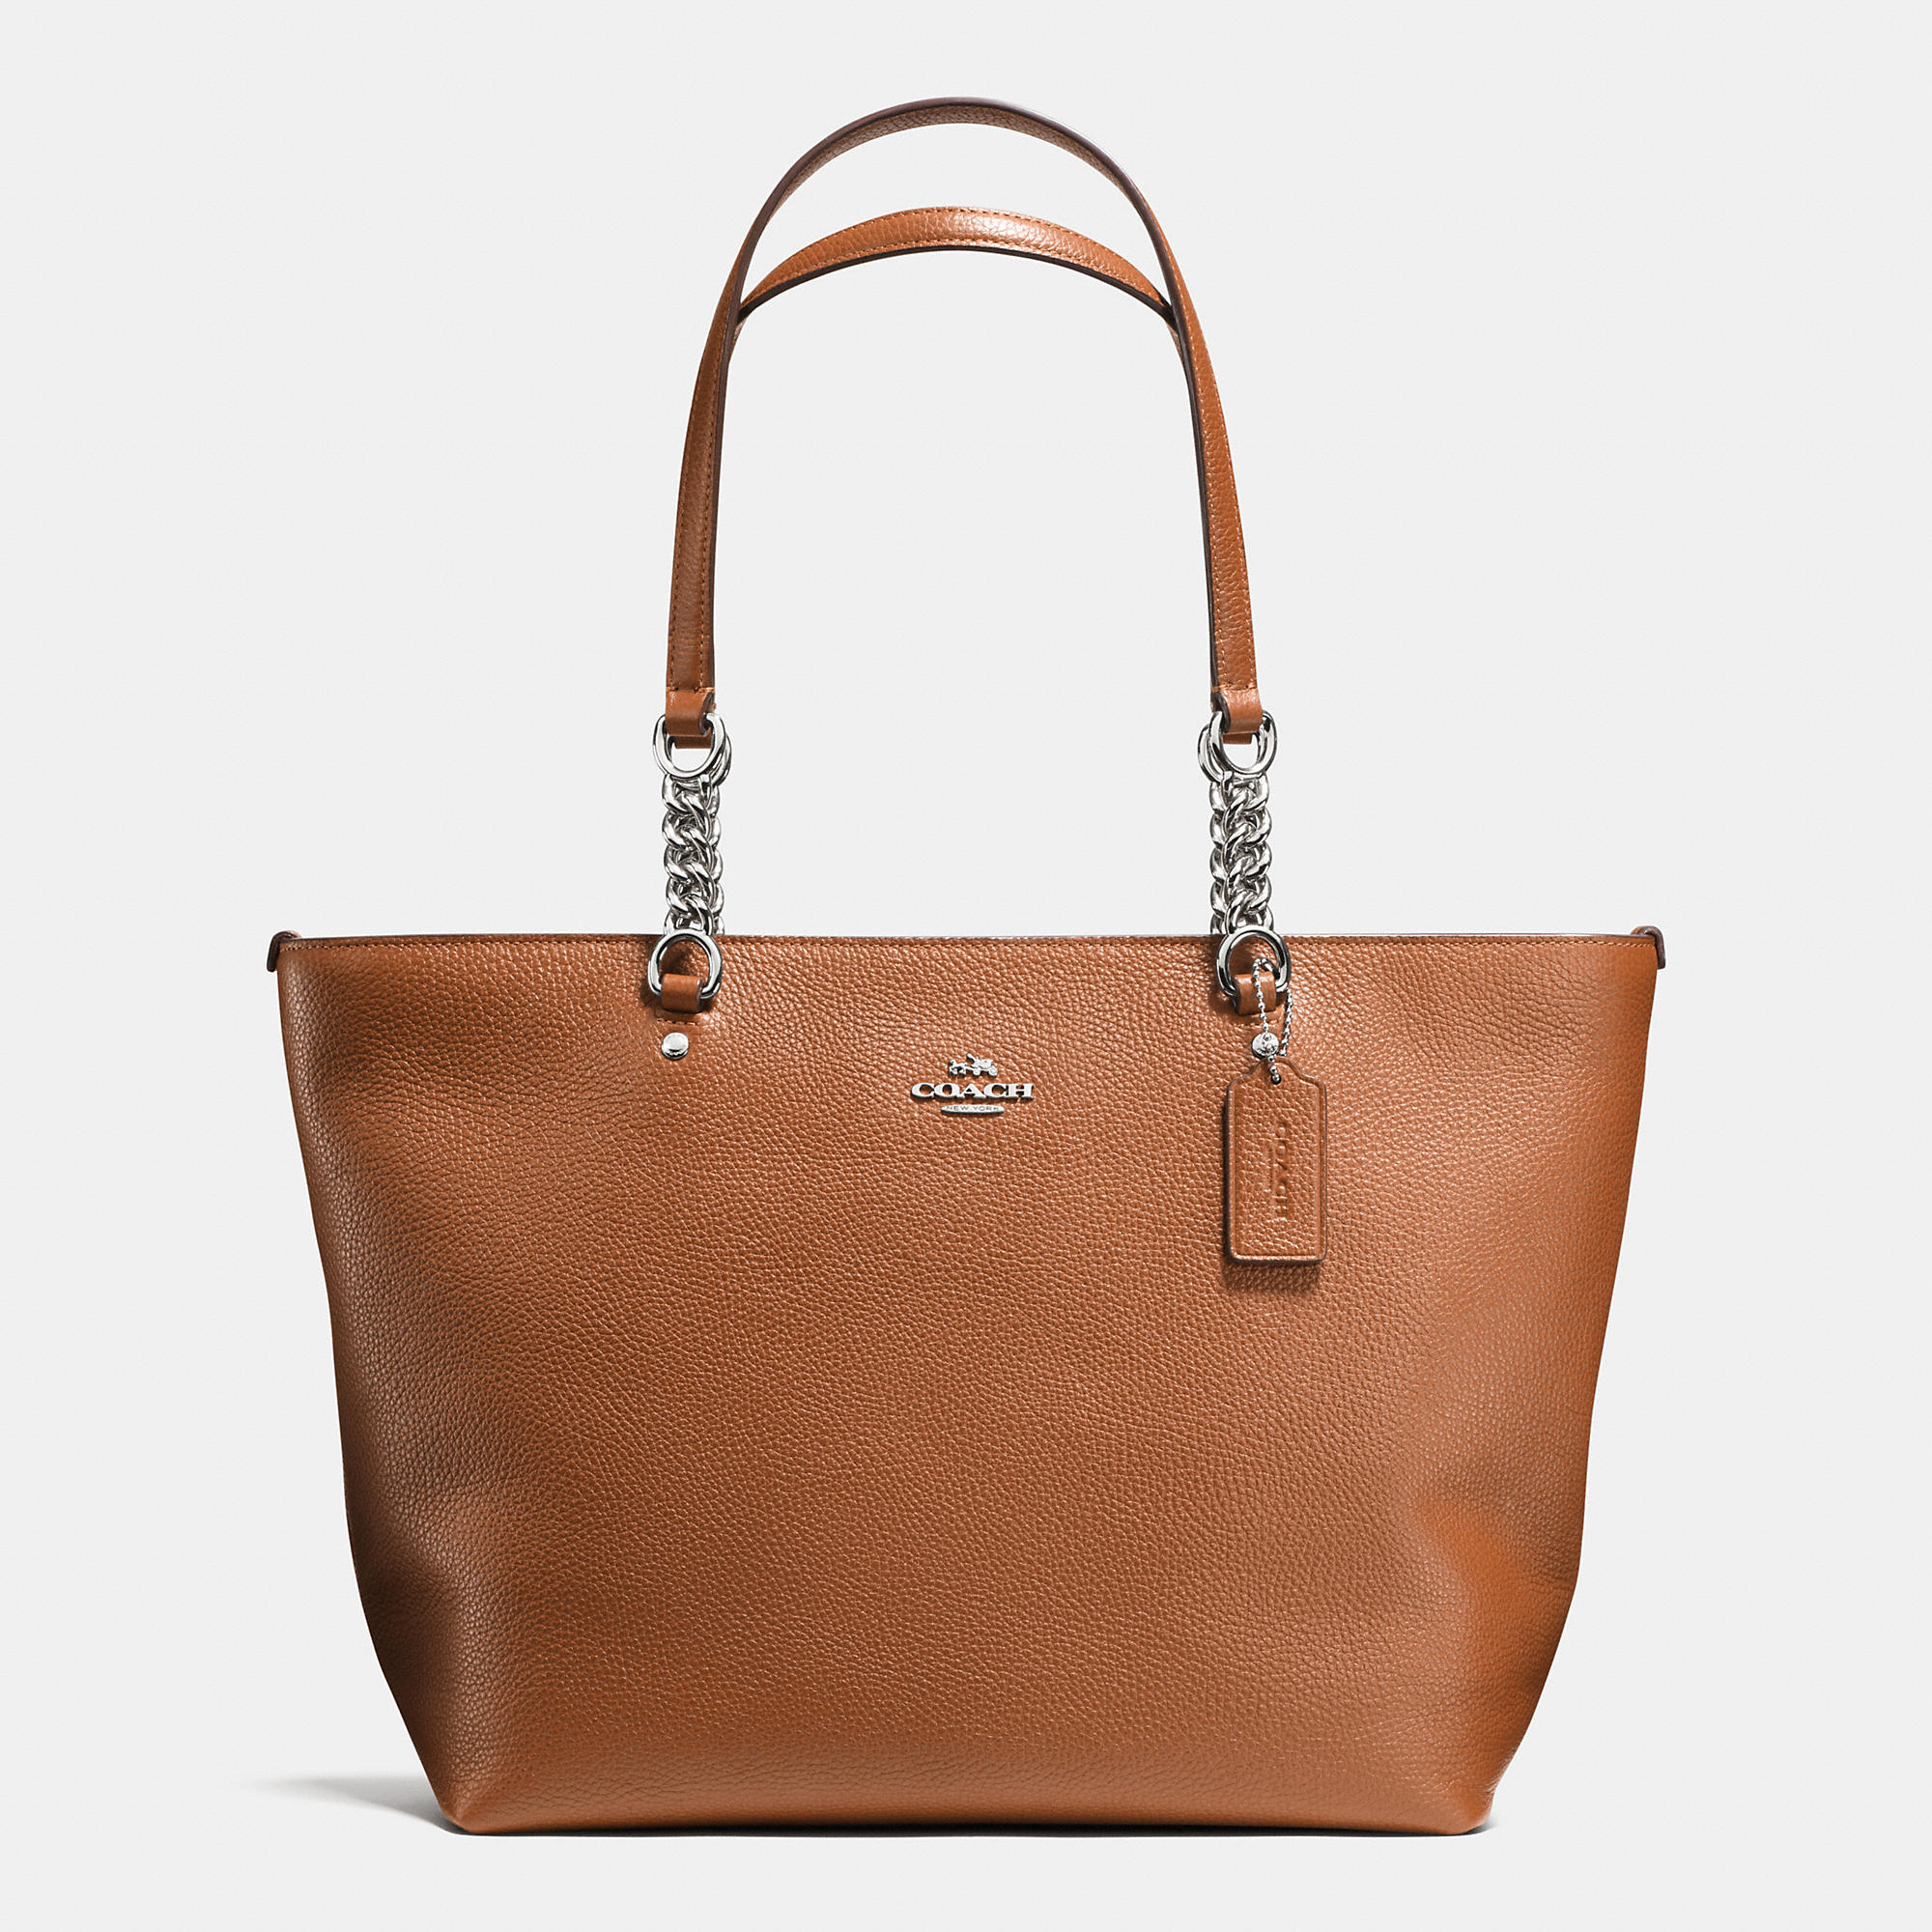 Lady Beloved Coach Sophia Tote In Pebble Leather | Coach Outlet Canada